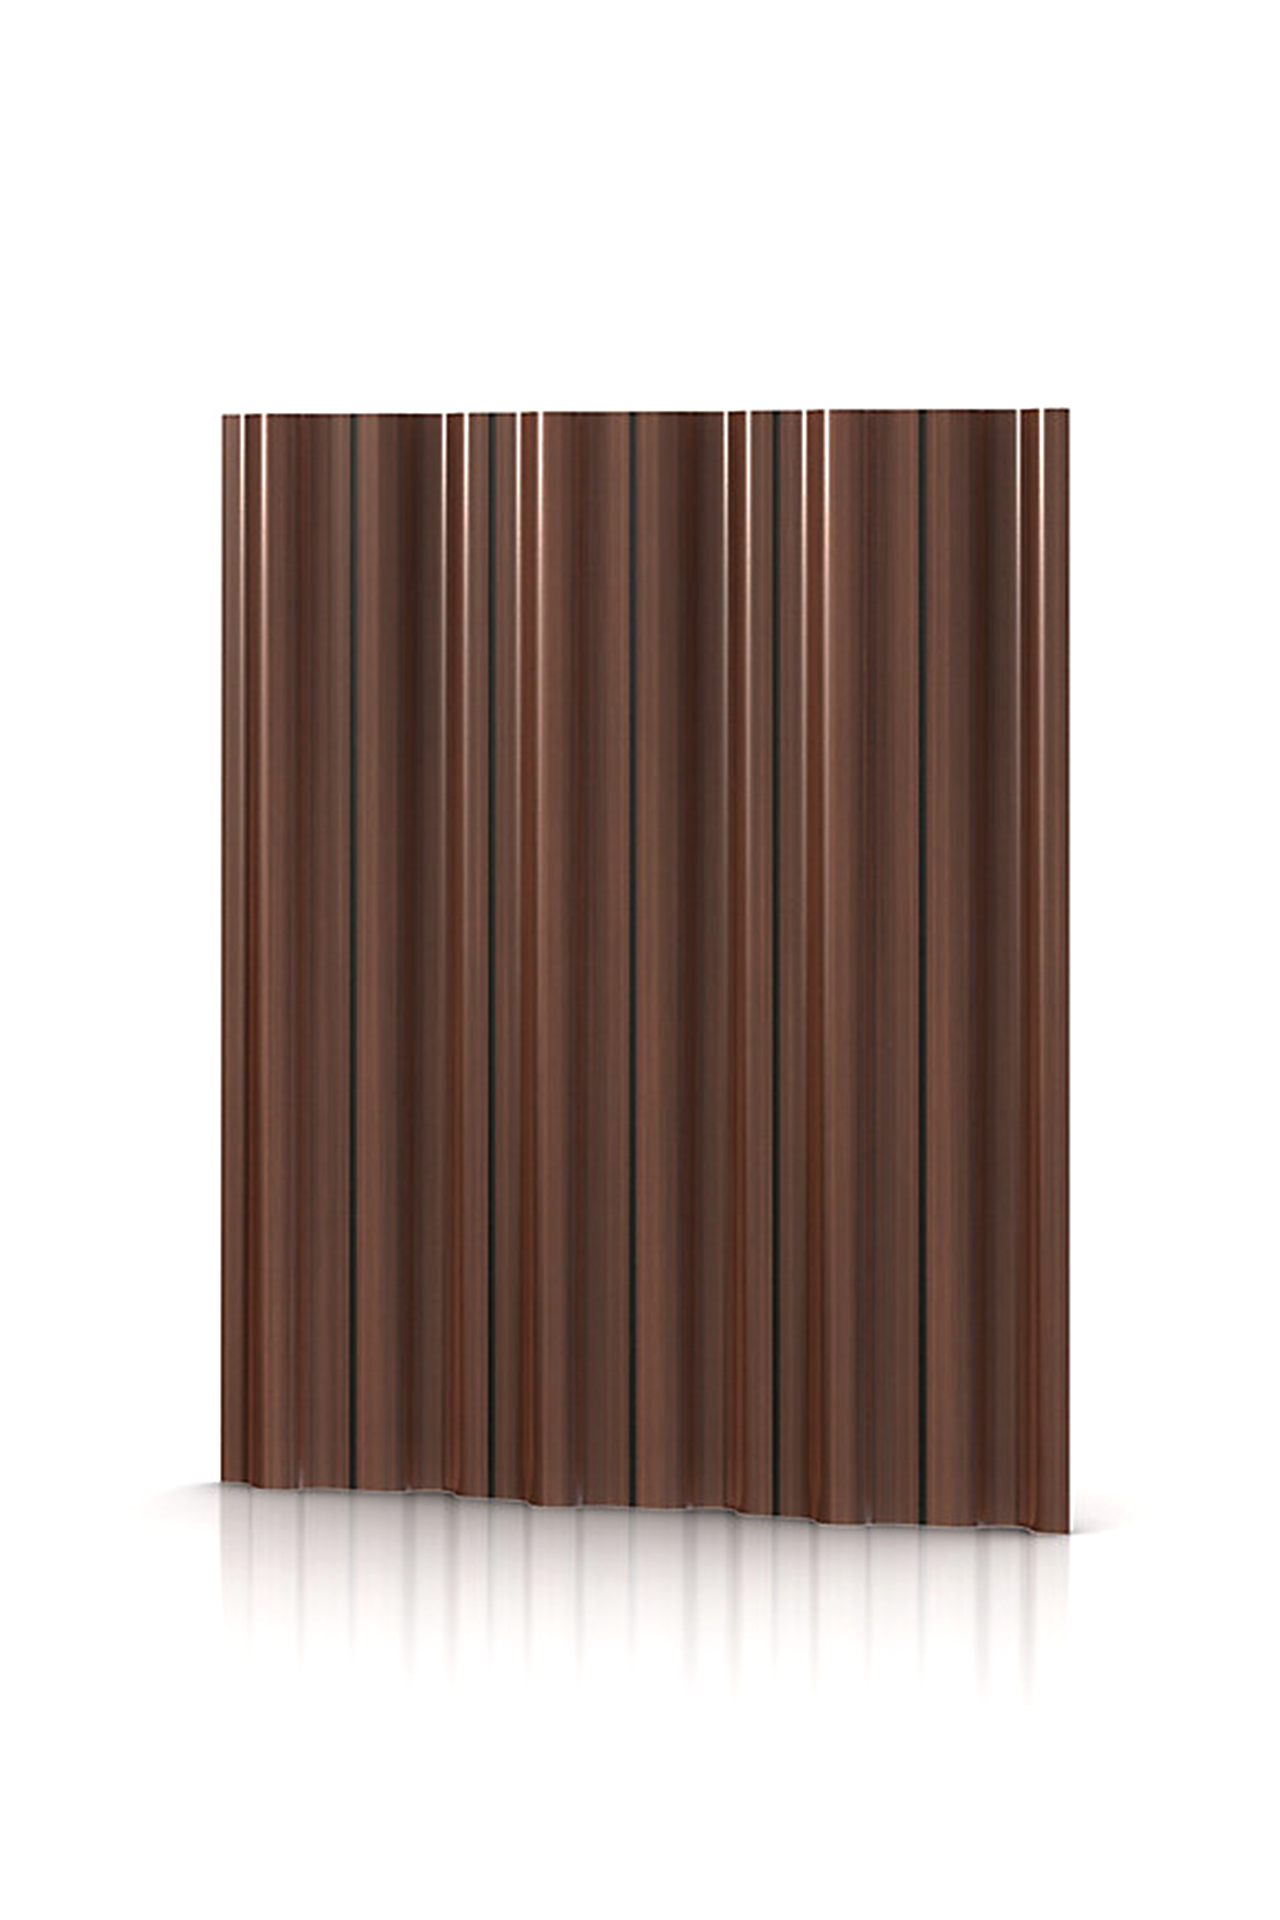 Eames Molded Plywood Folding Screen (4673018986611)